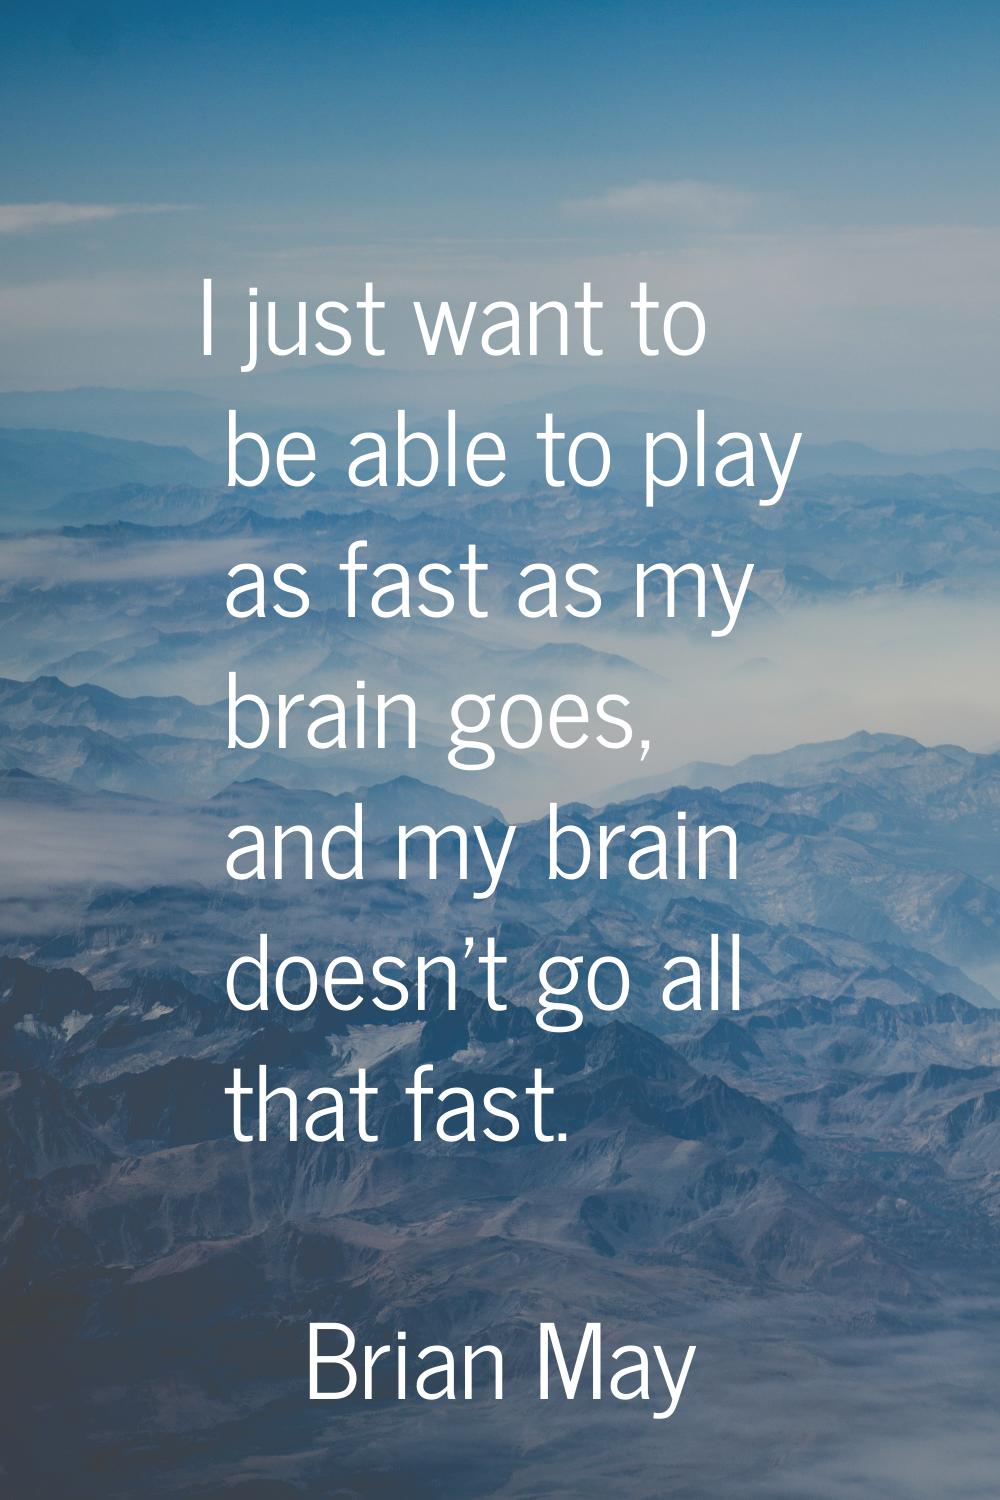 I just want to be able to play as fast as my brain goes, and my brain doesn't go all that fast.